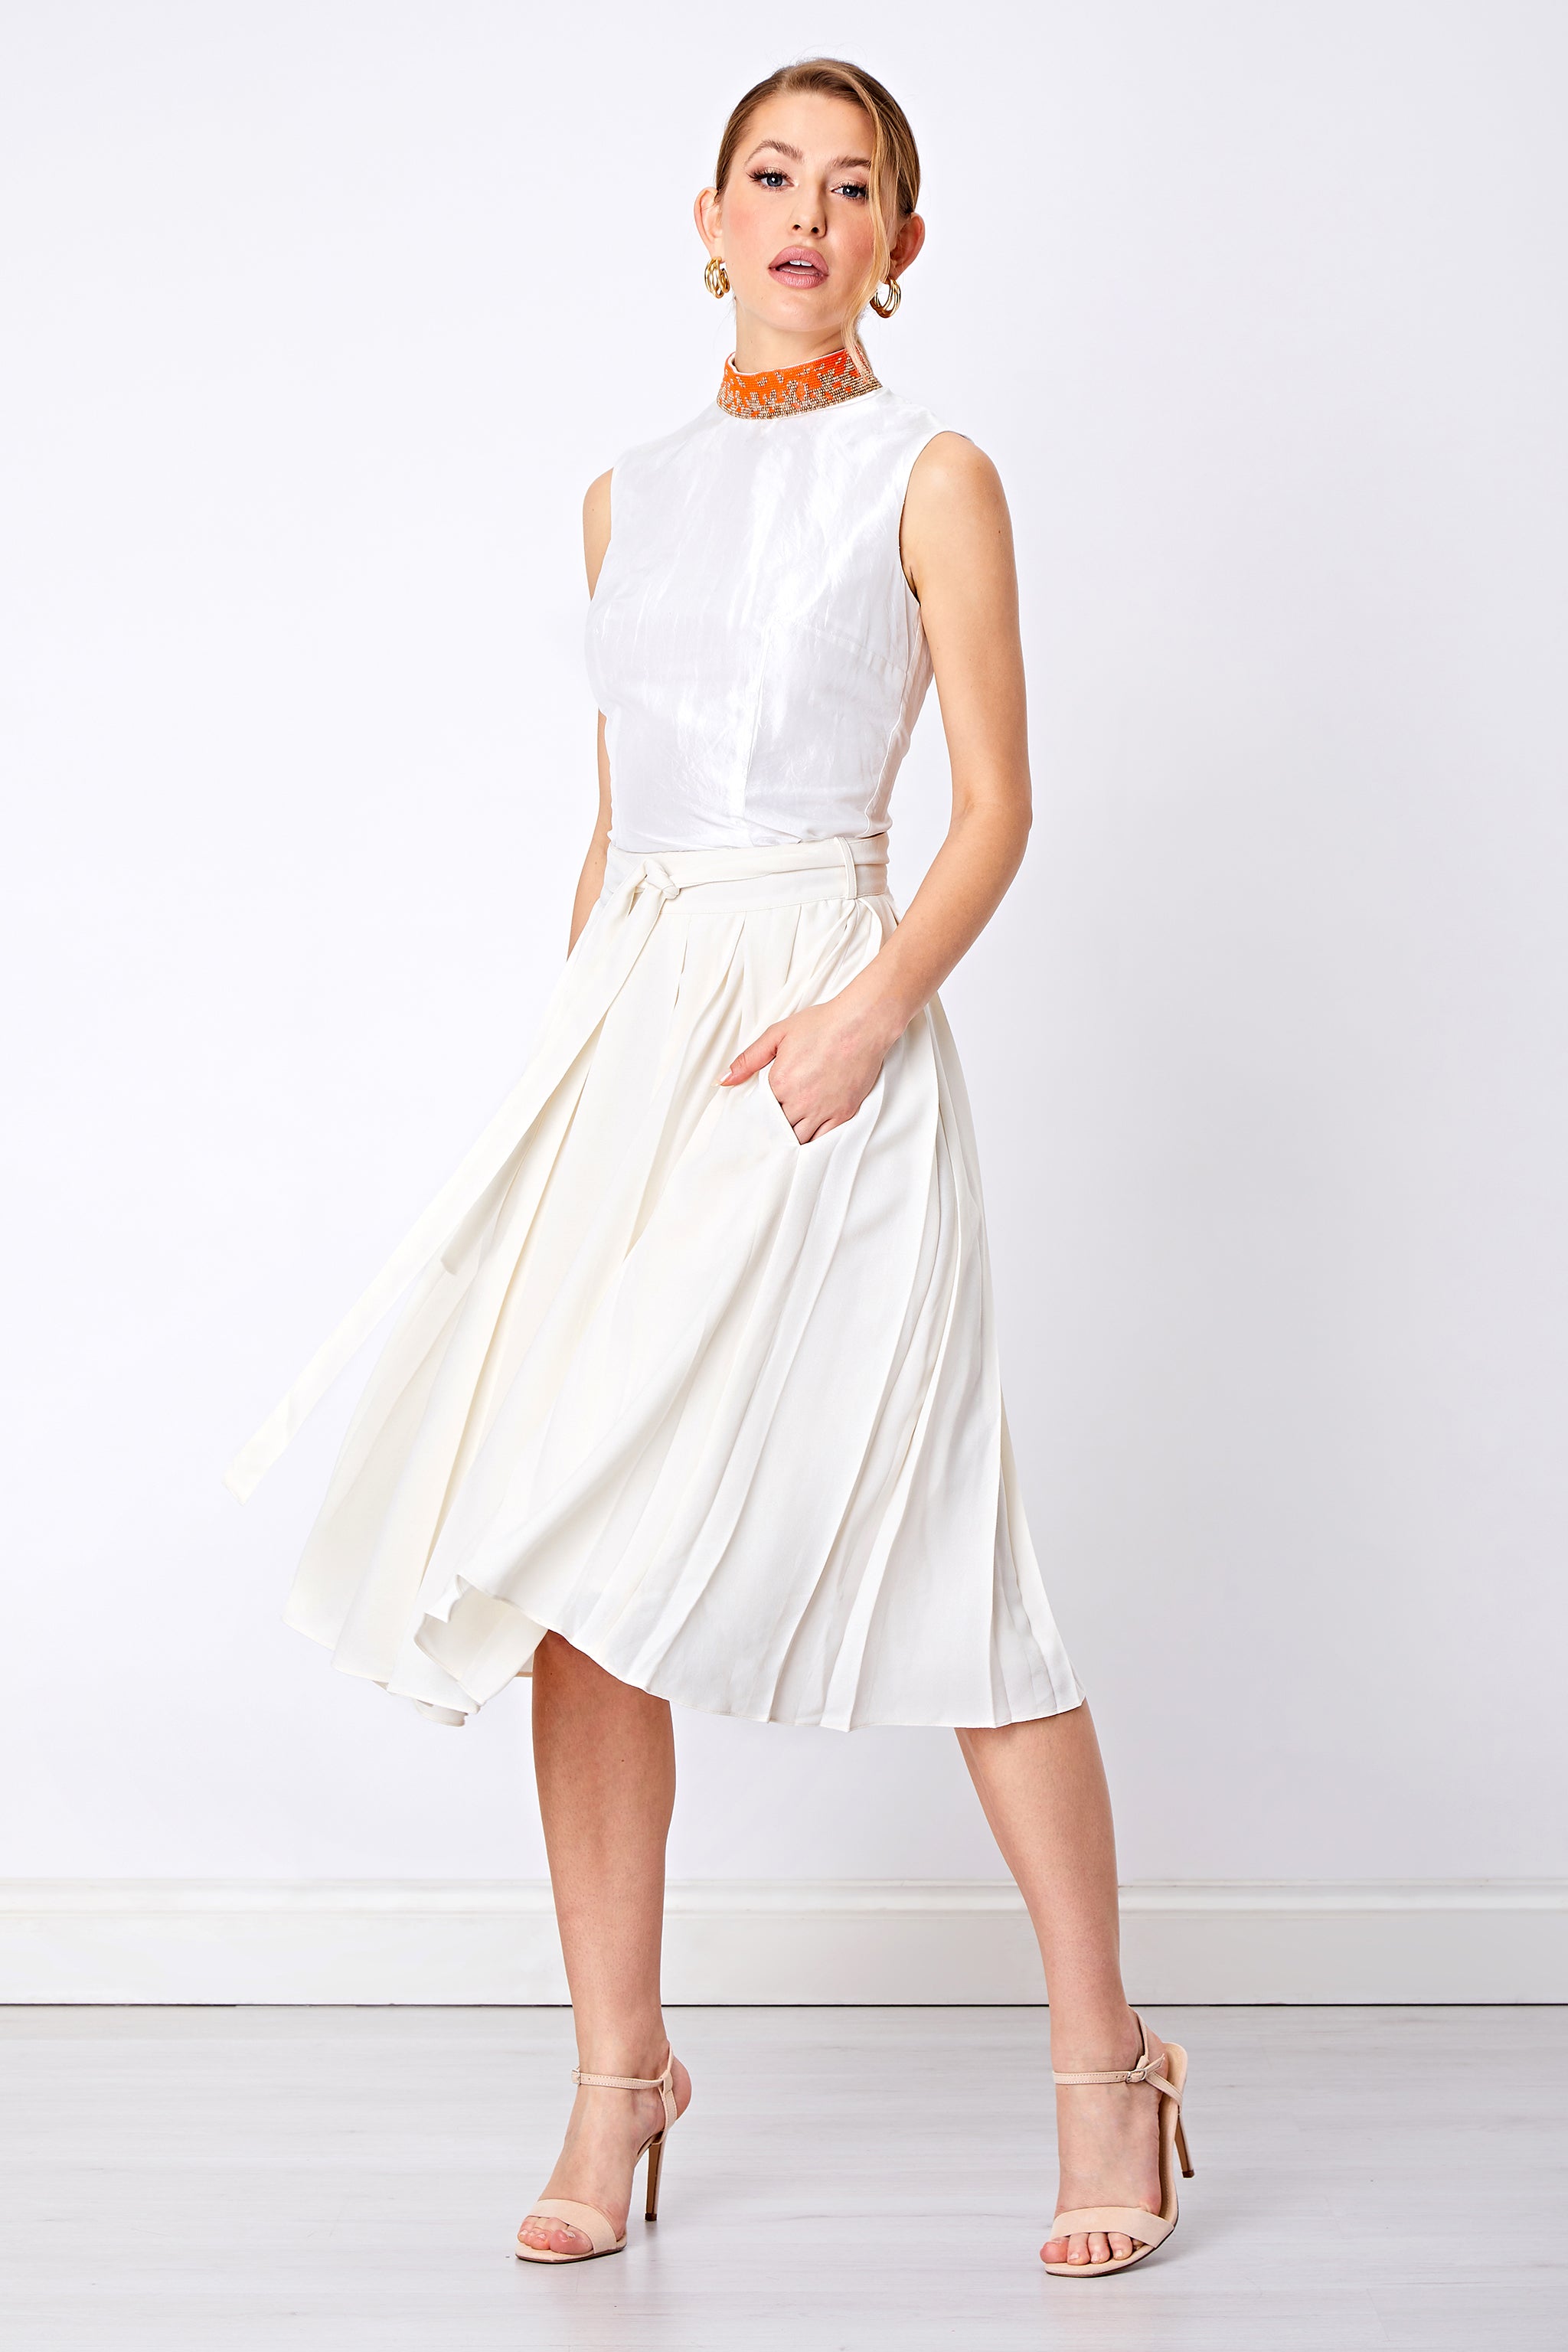 Model wear flared white pleated skirt with sleeveless top